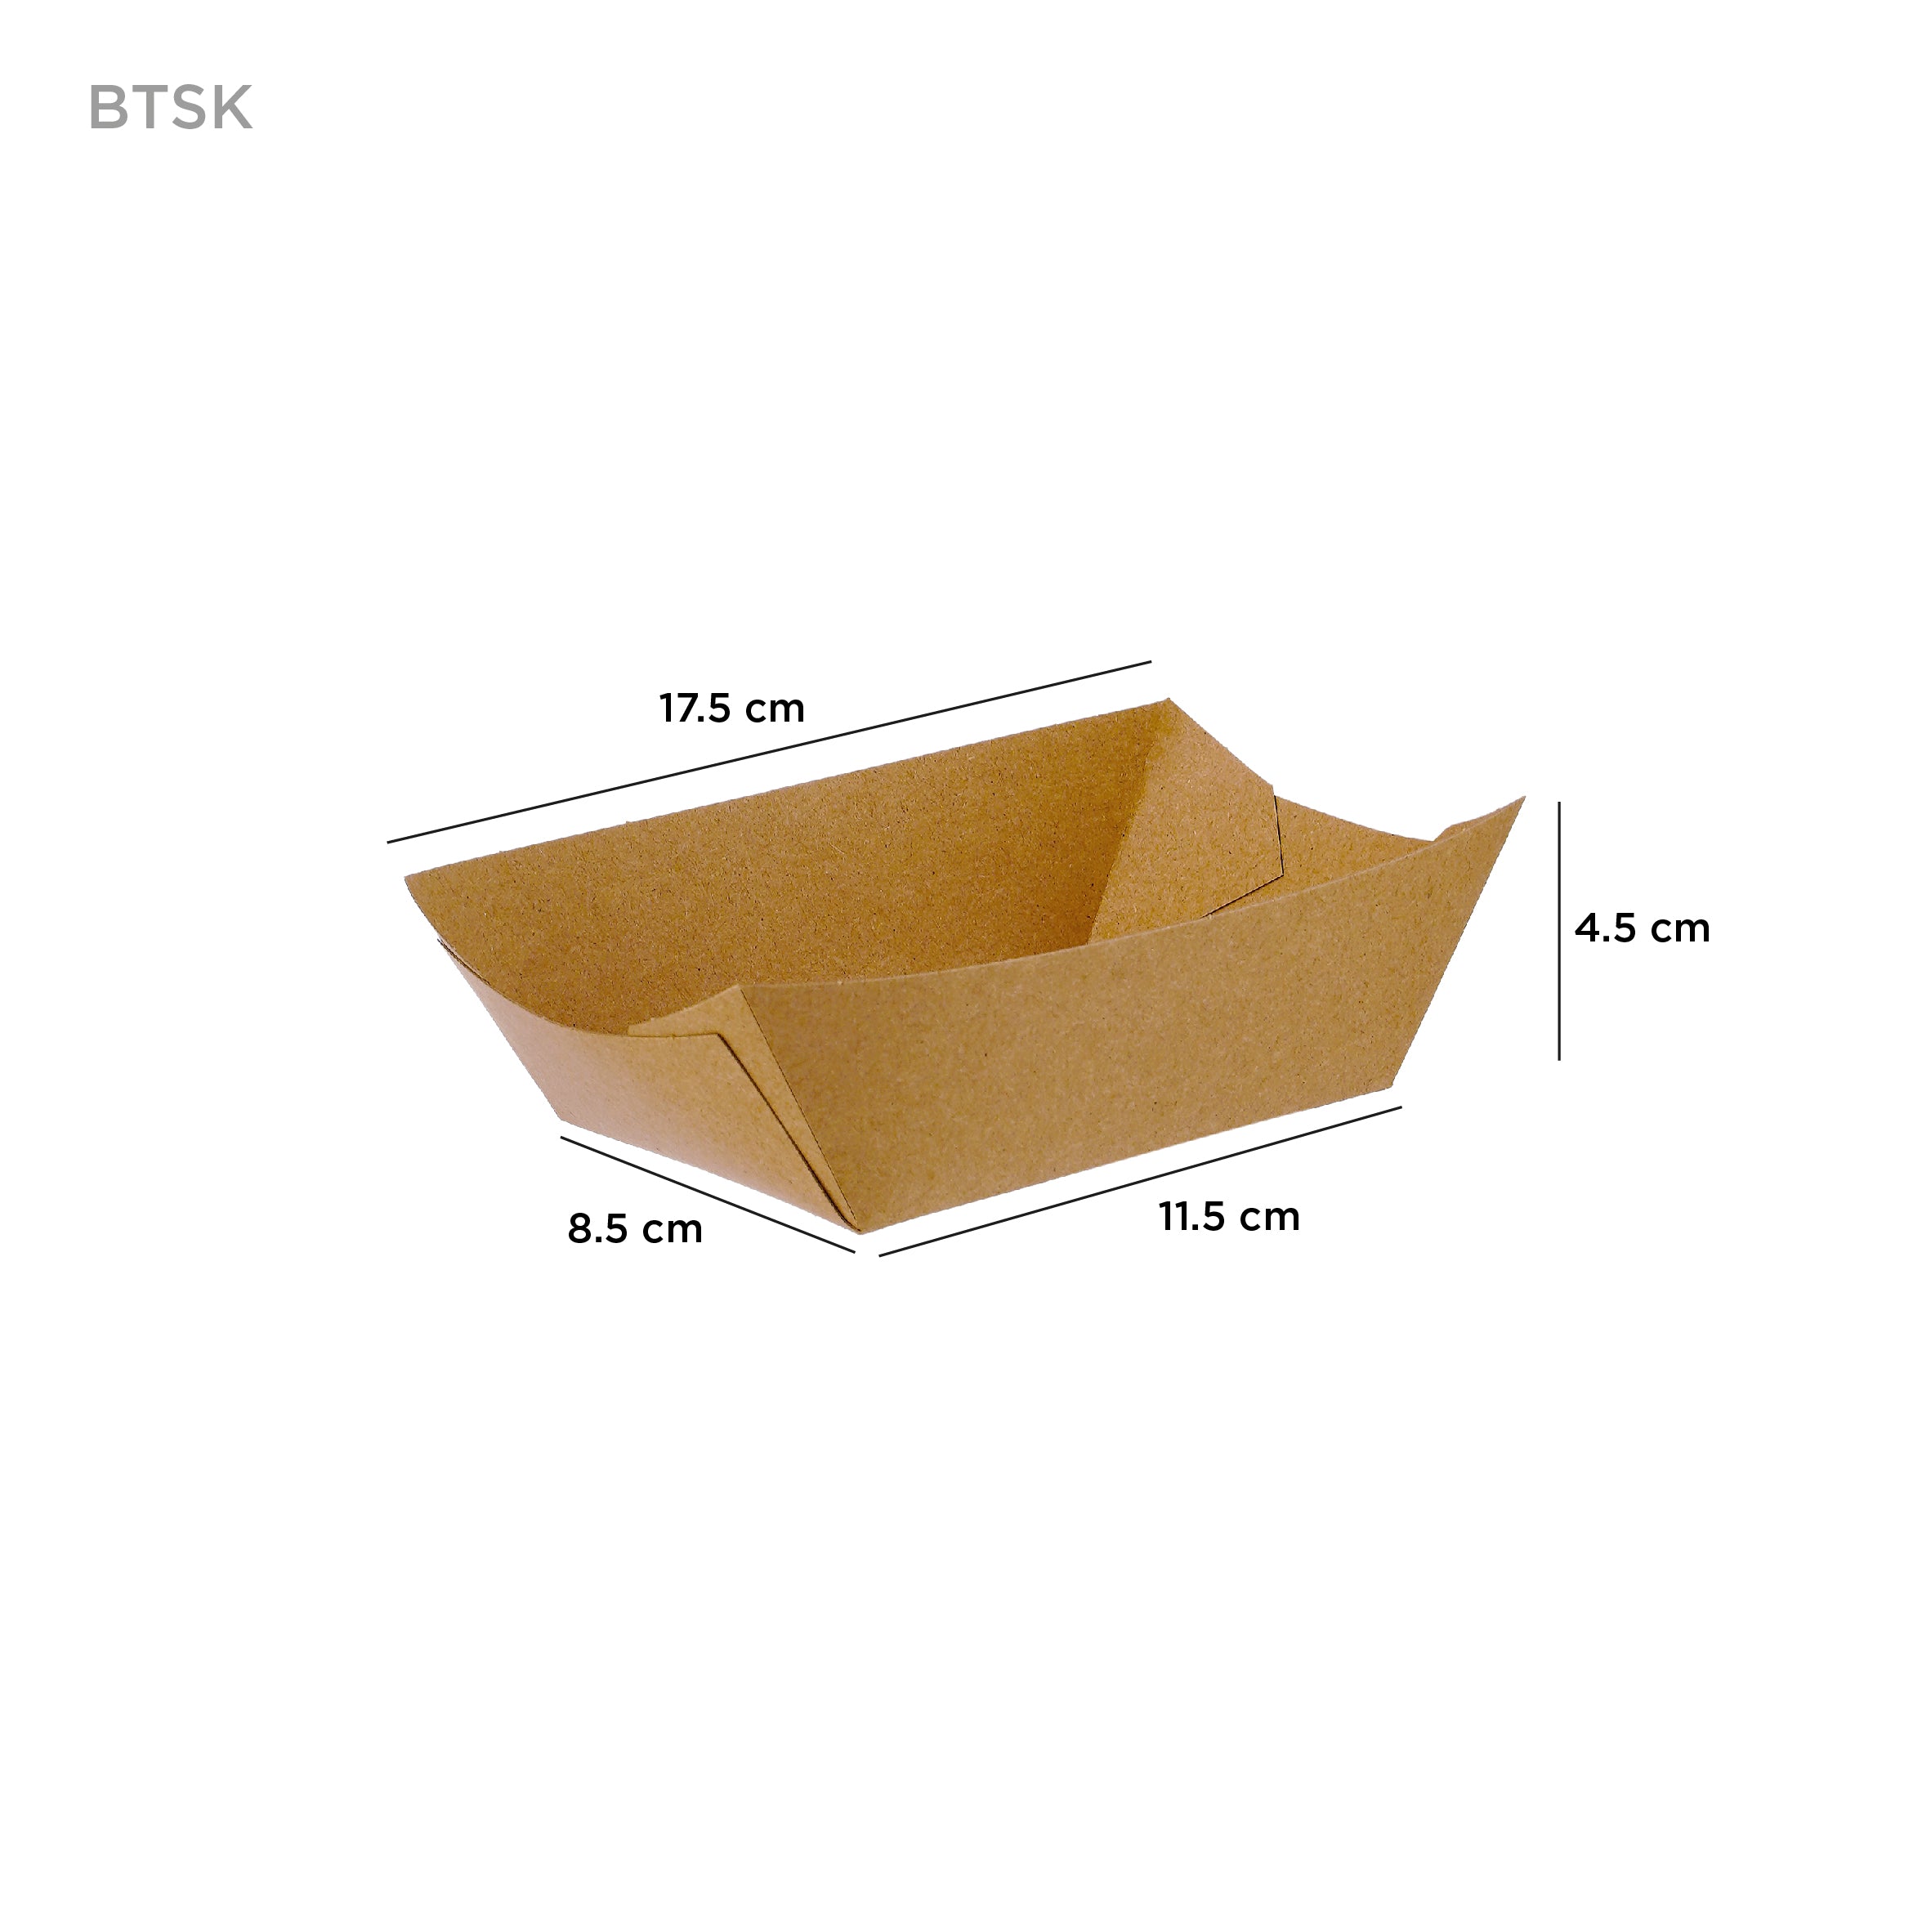 Small paper boat kraft tray  for concession stands - Hotpack global